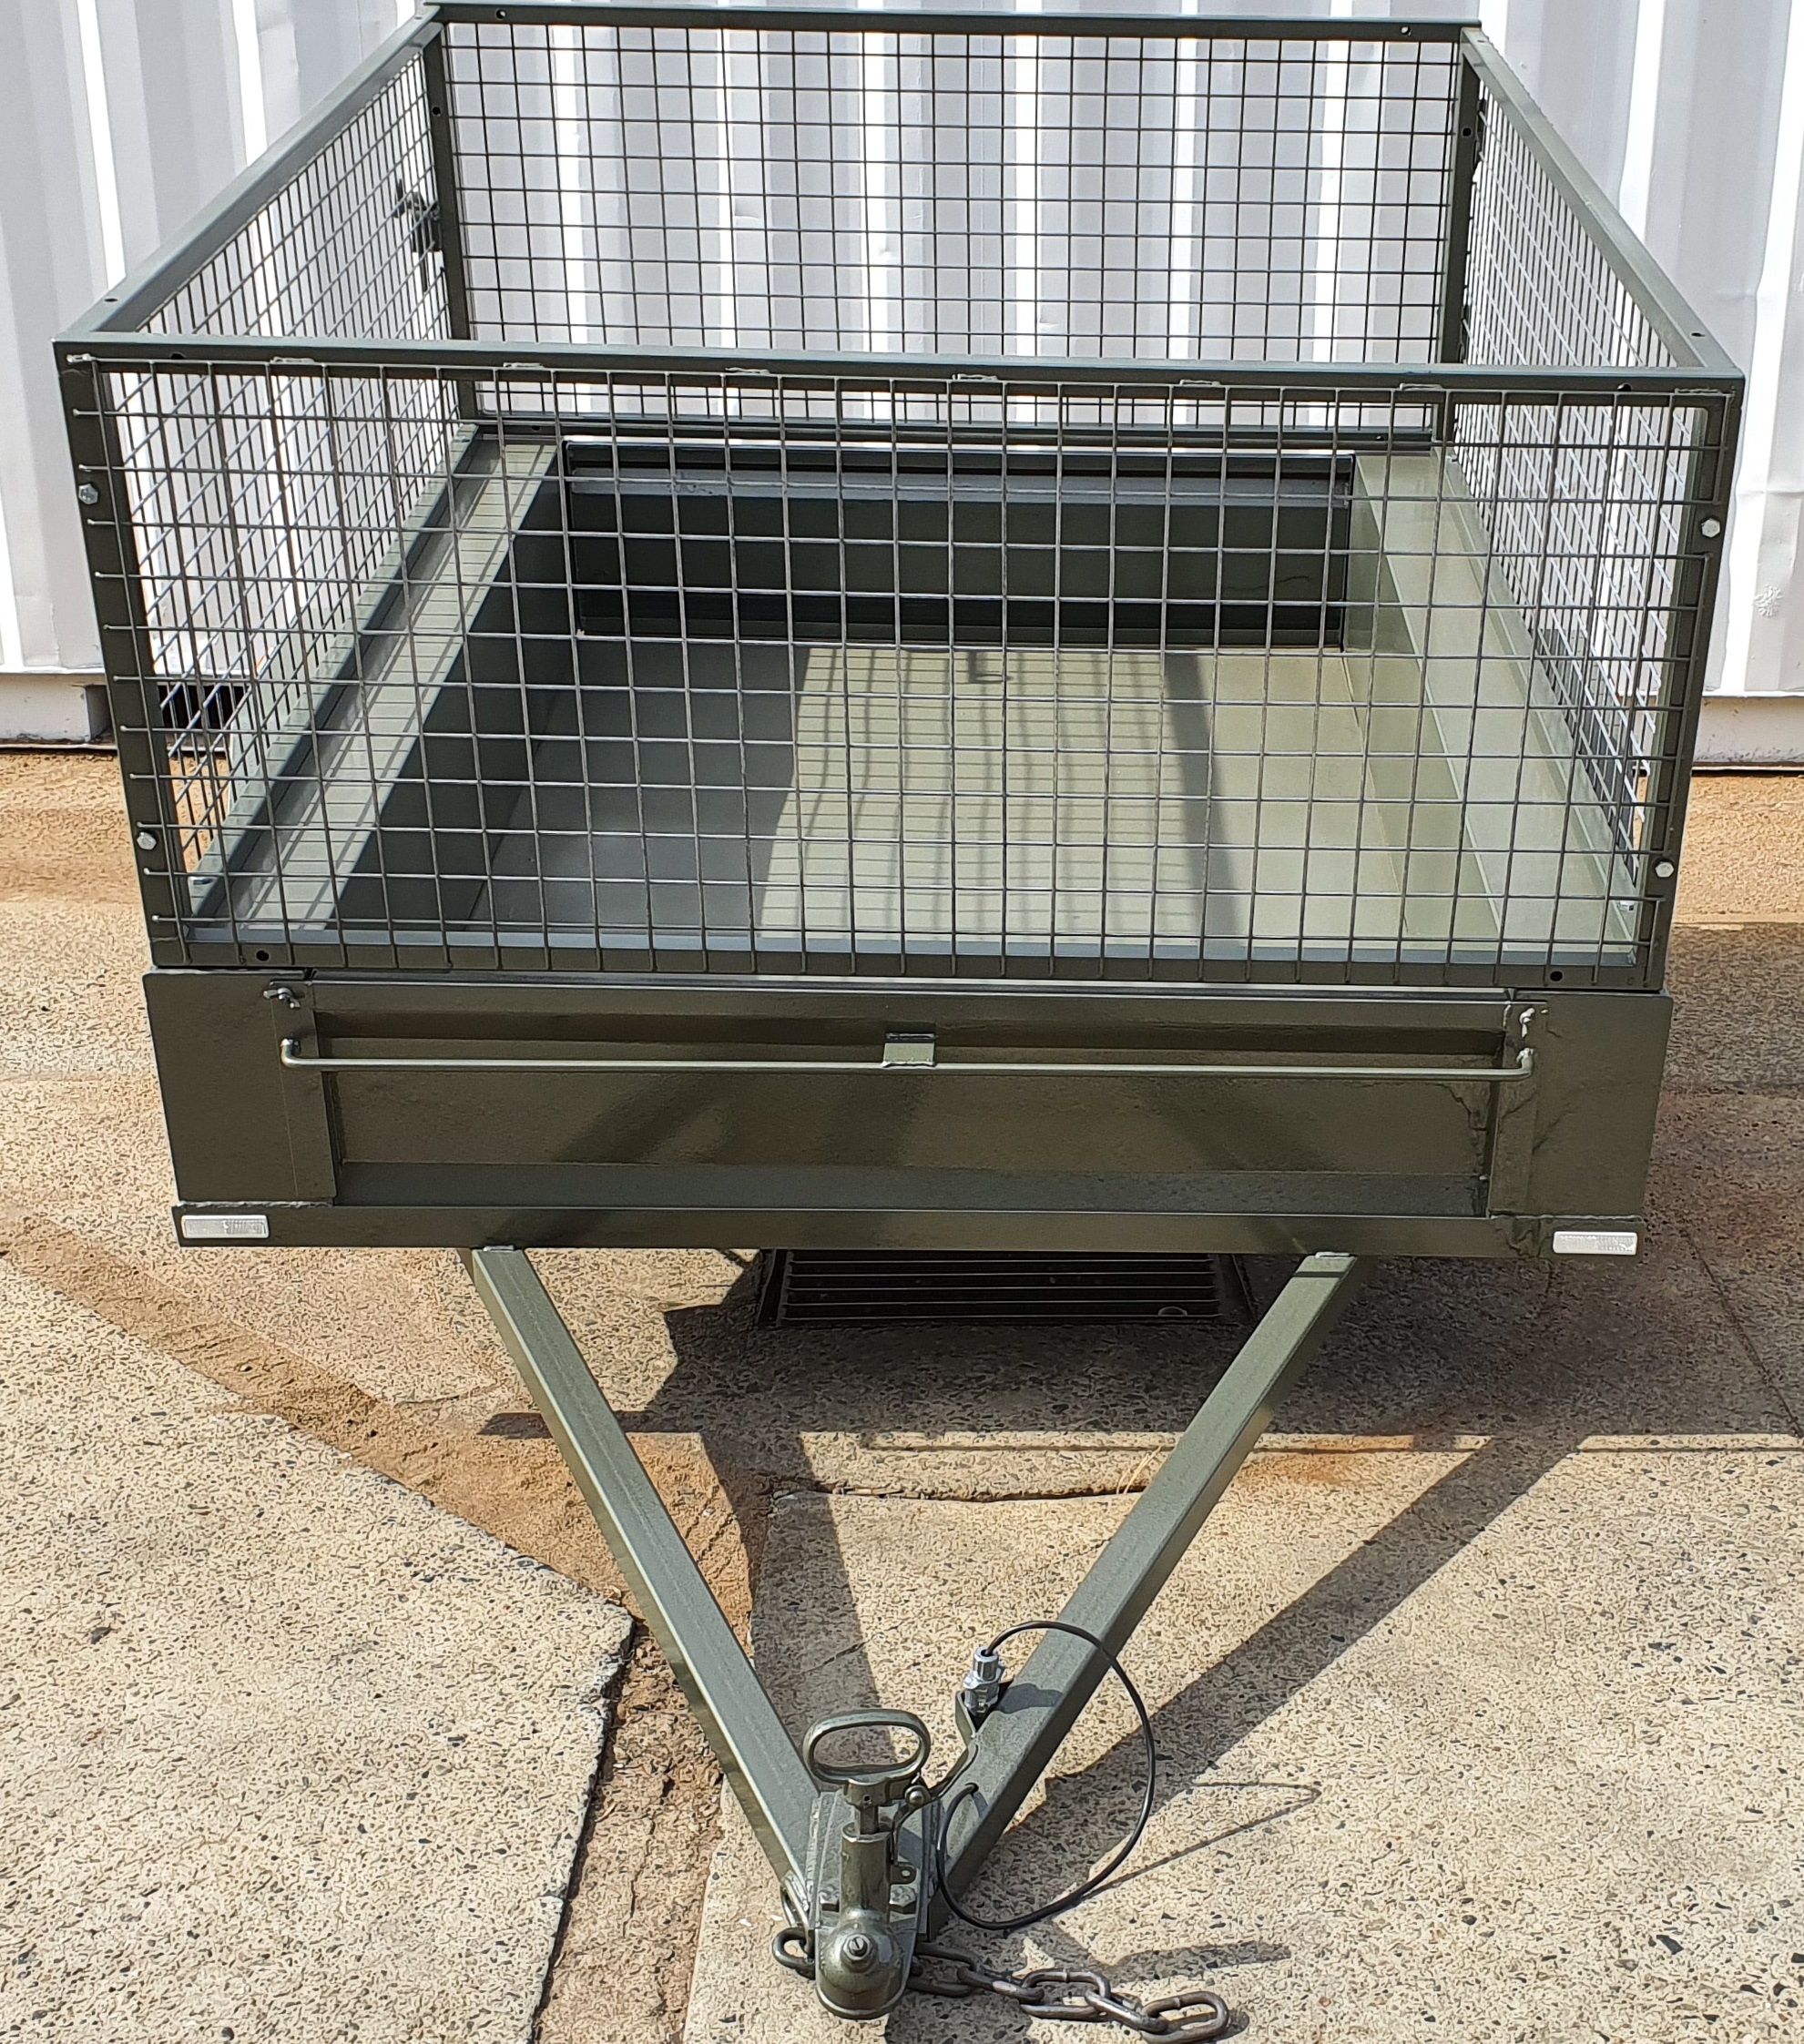 6x4 cage front